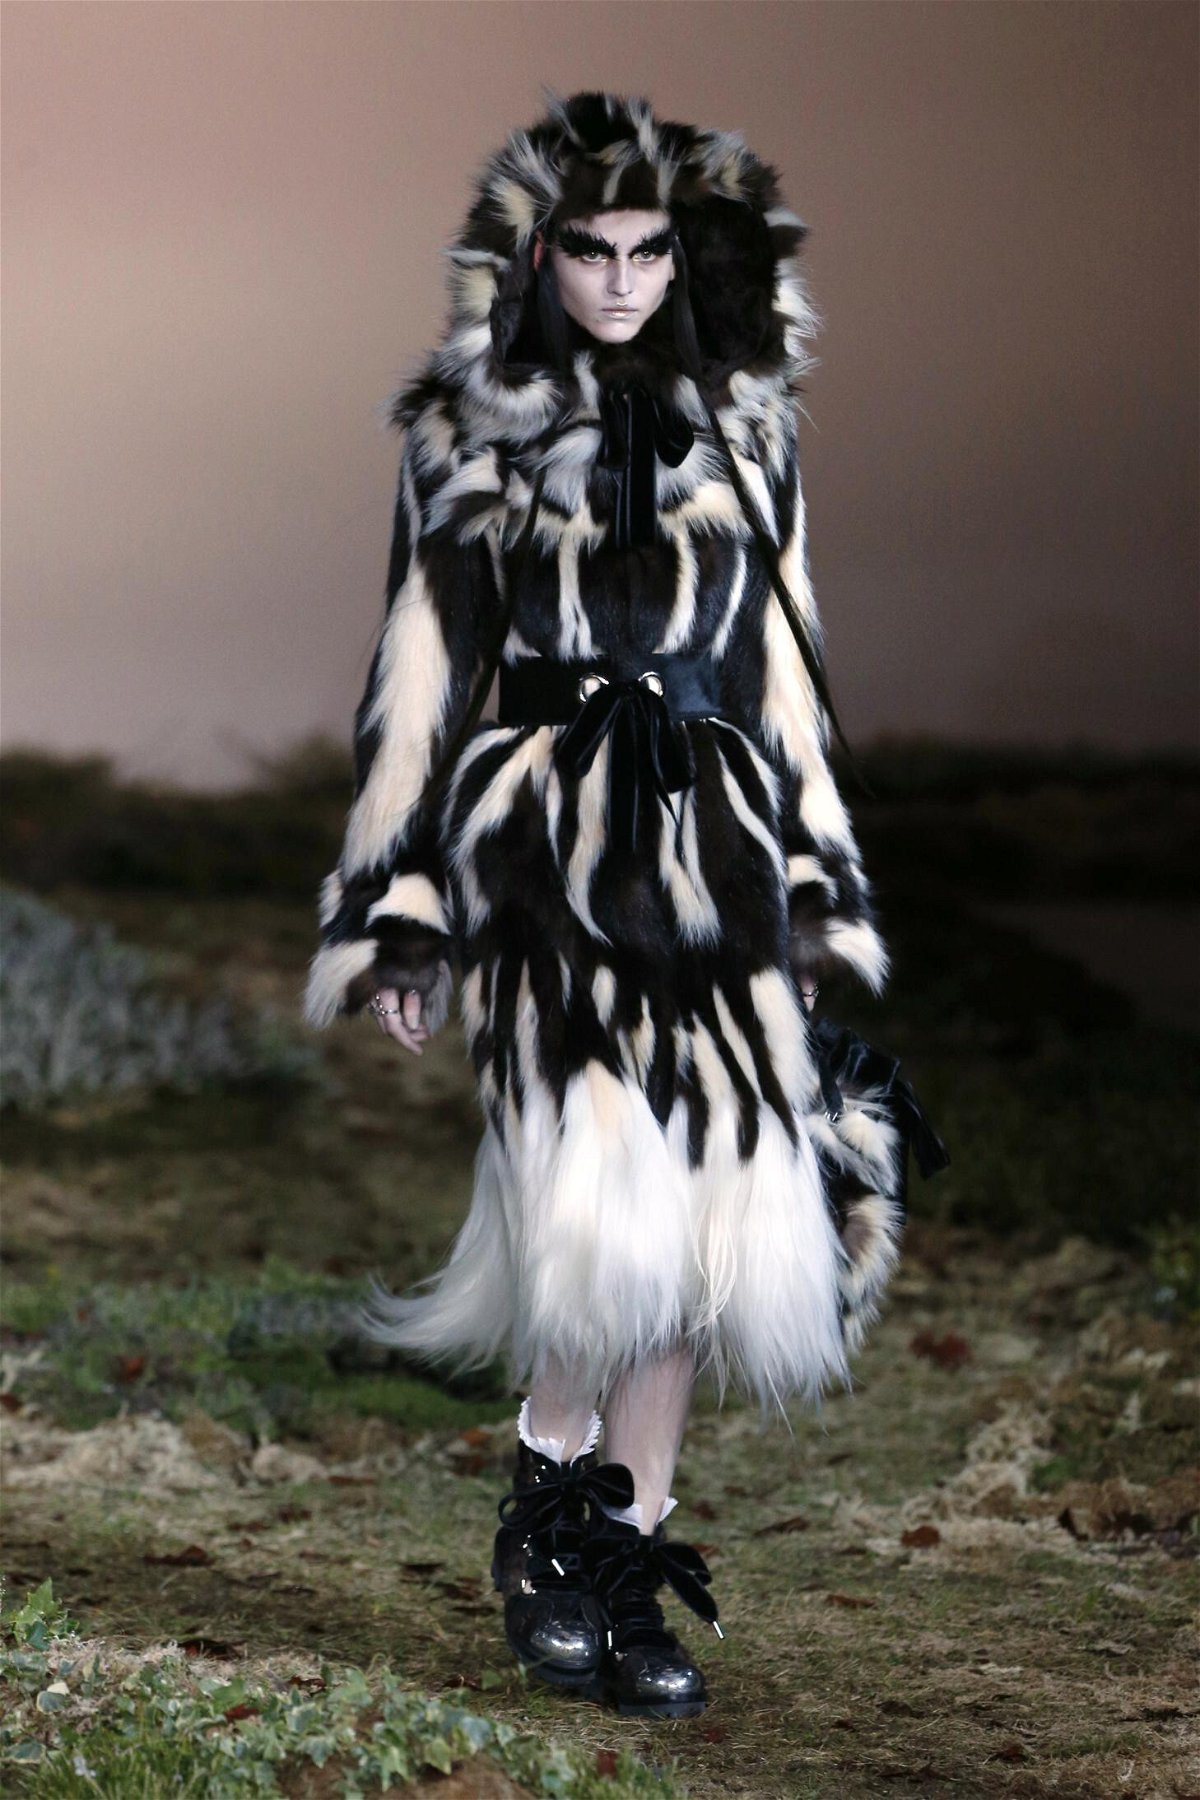 <i>Francois Guillot/AFP/Getty</i><br/>Alexander McQueen's Autumn-Winter 2015 collection at Paris Fashion Week included genuine fur. Though the brand committed to ceasing fur production in April 2021.